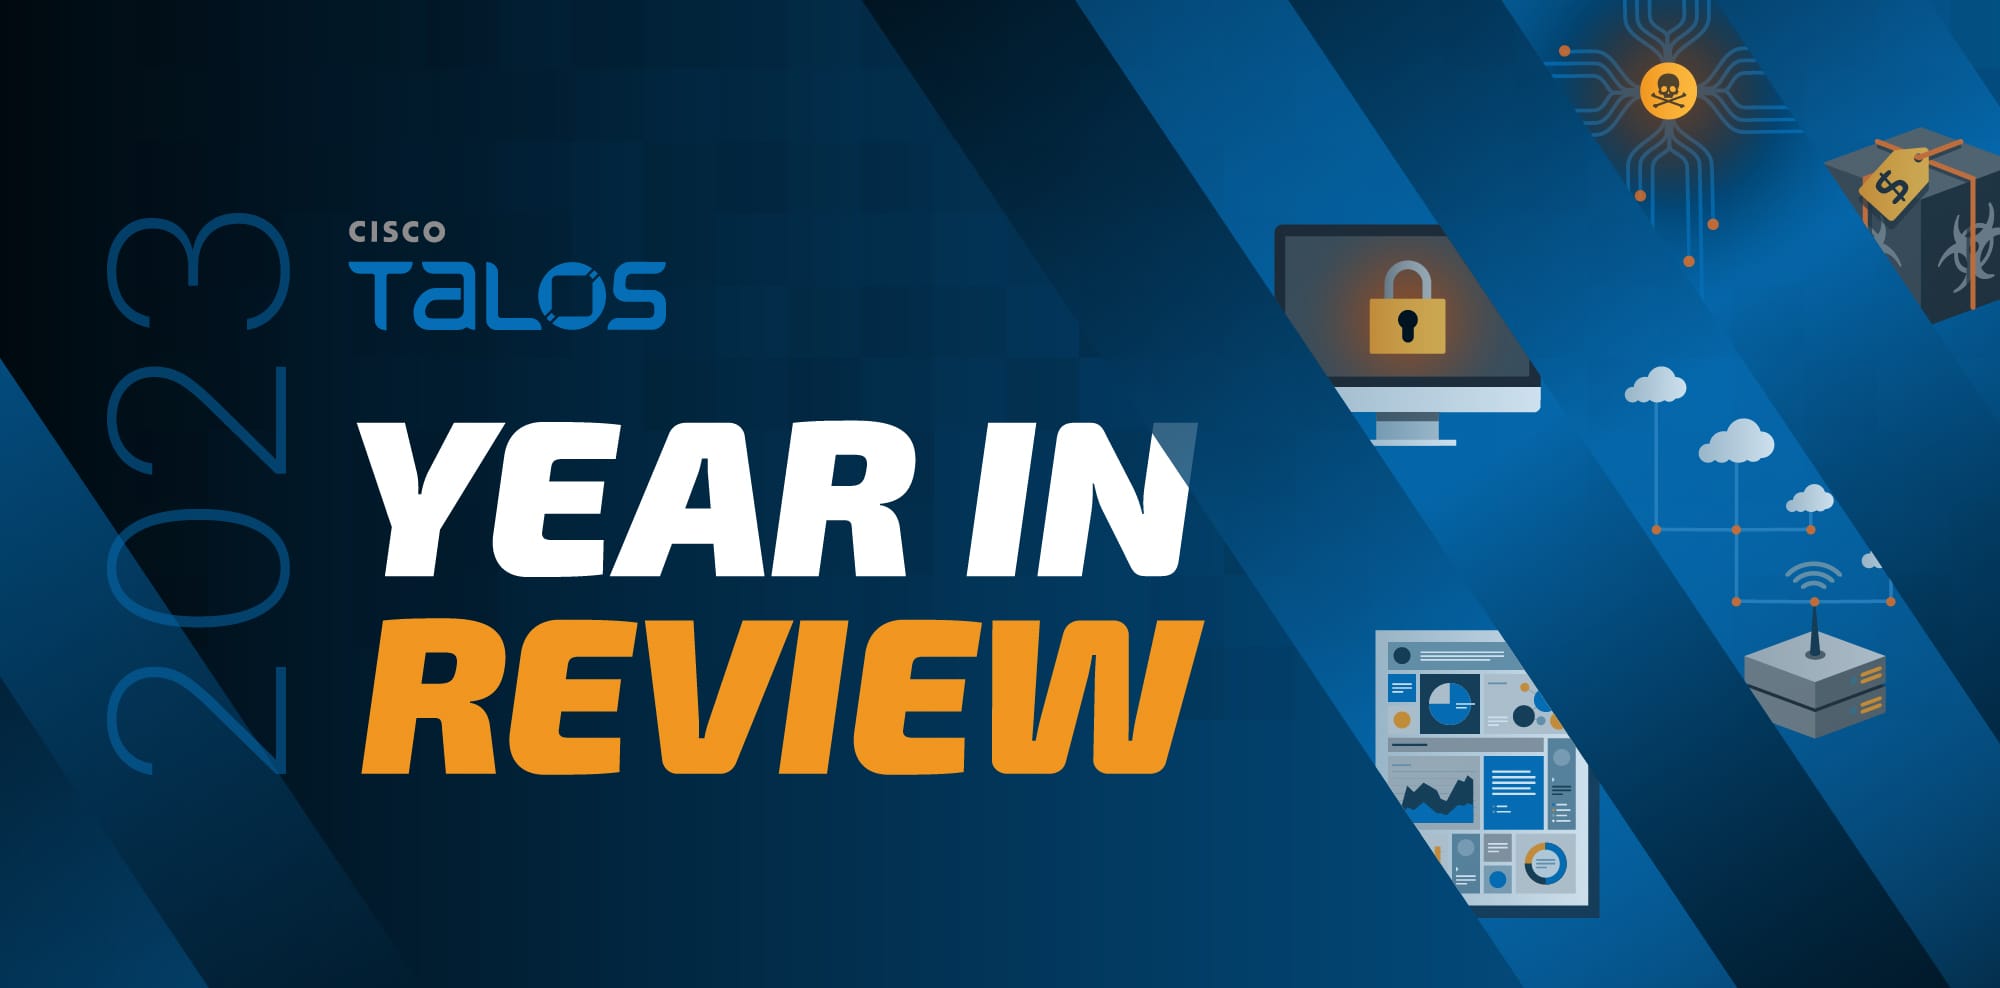 Video: Talos 2023 Year in Review highlights